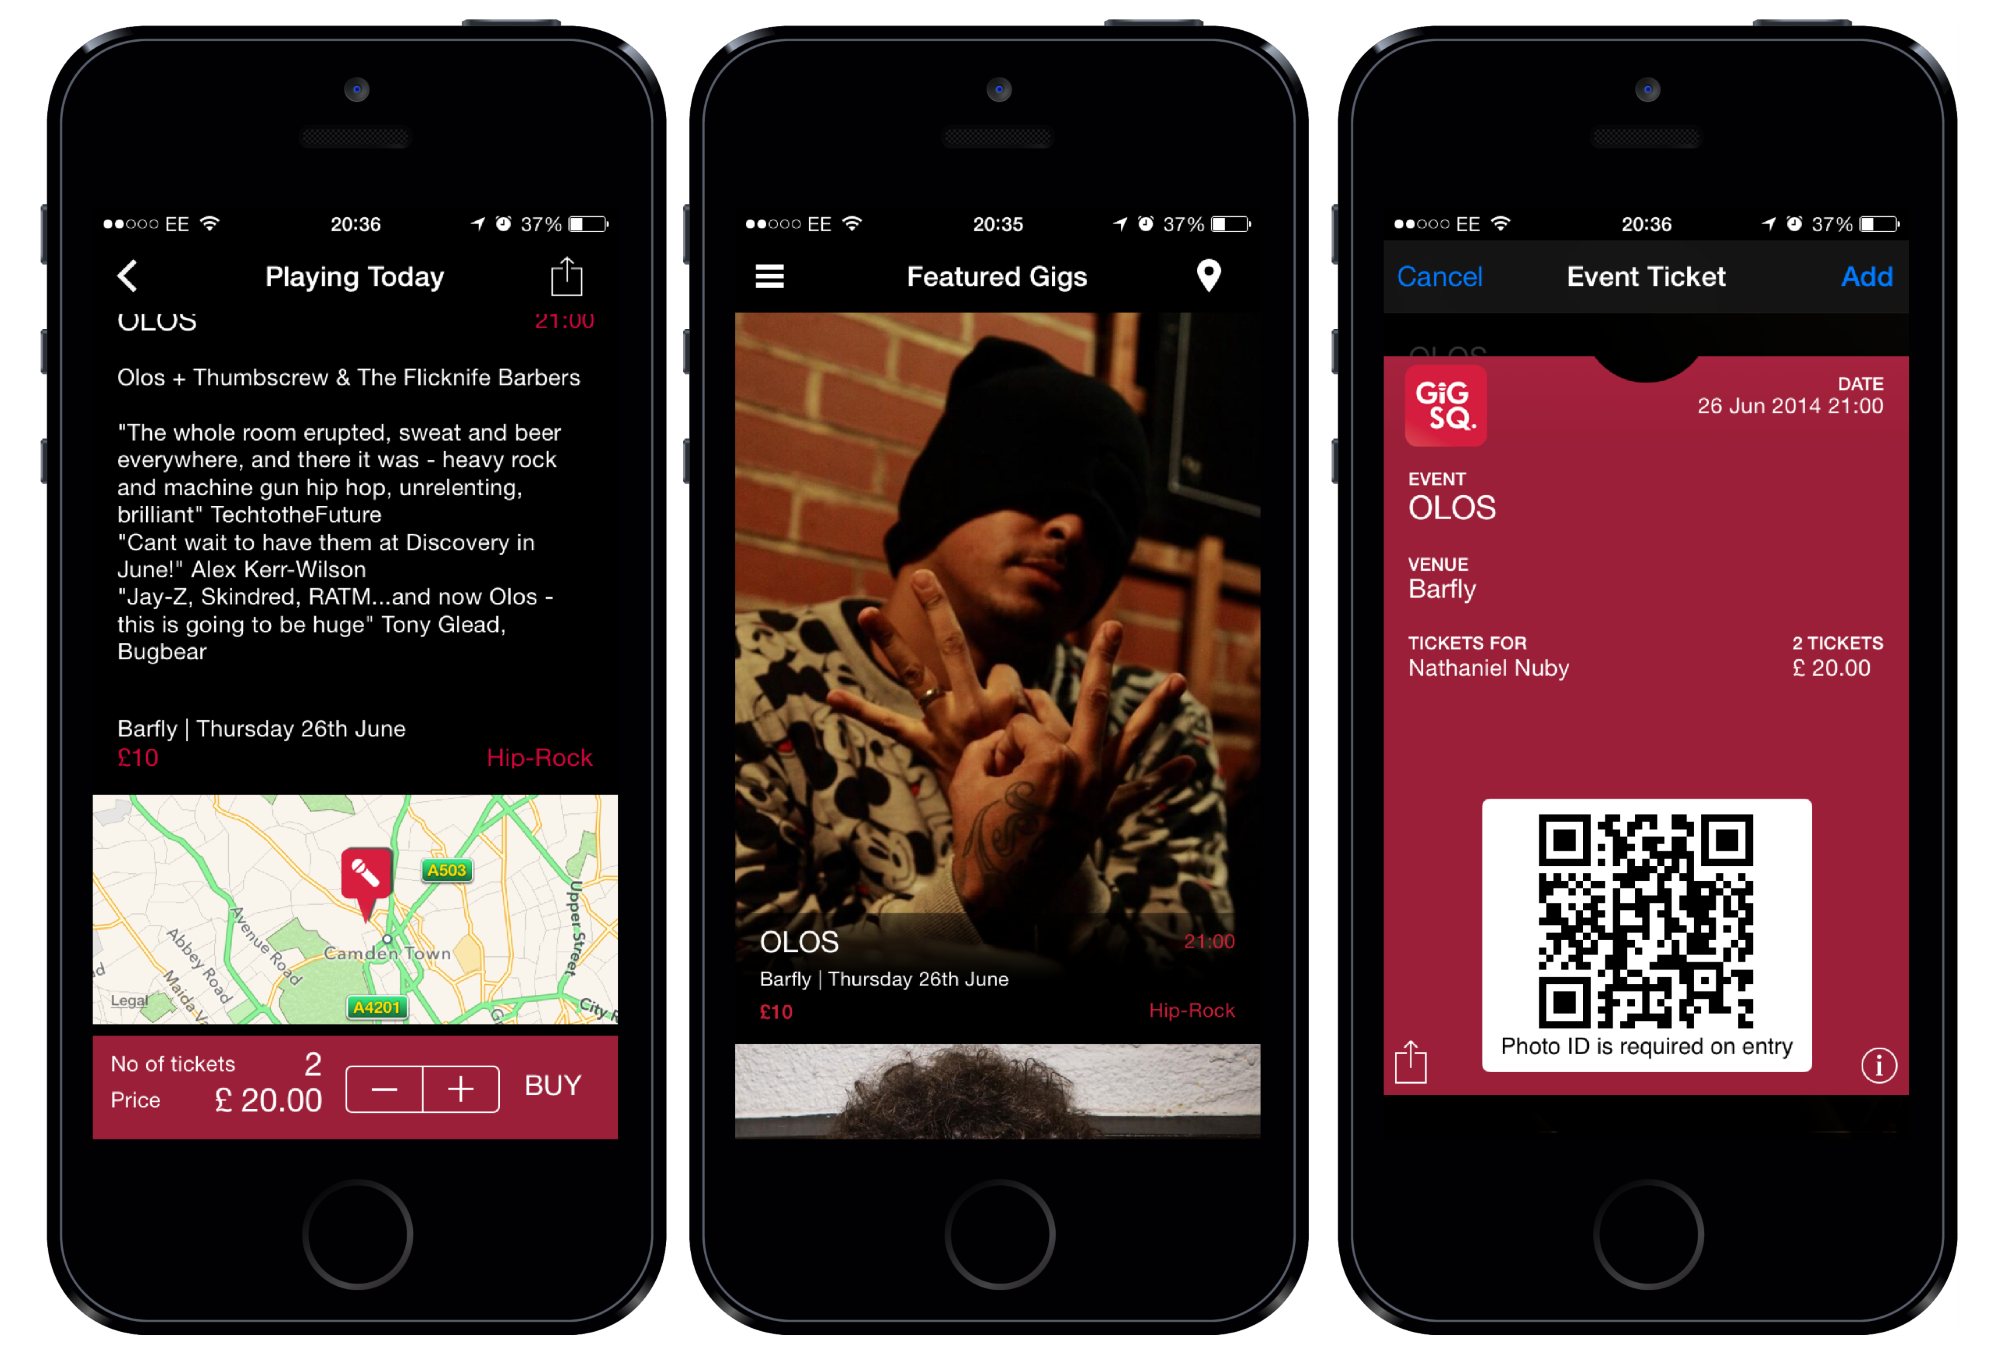 Live Music Discovery App Gig Sq. Expands into Ticketing